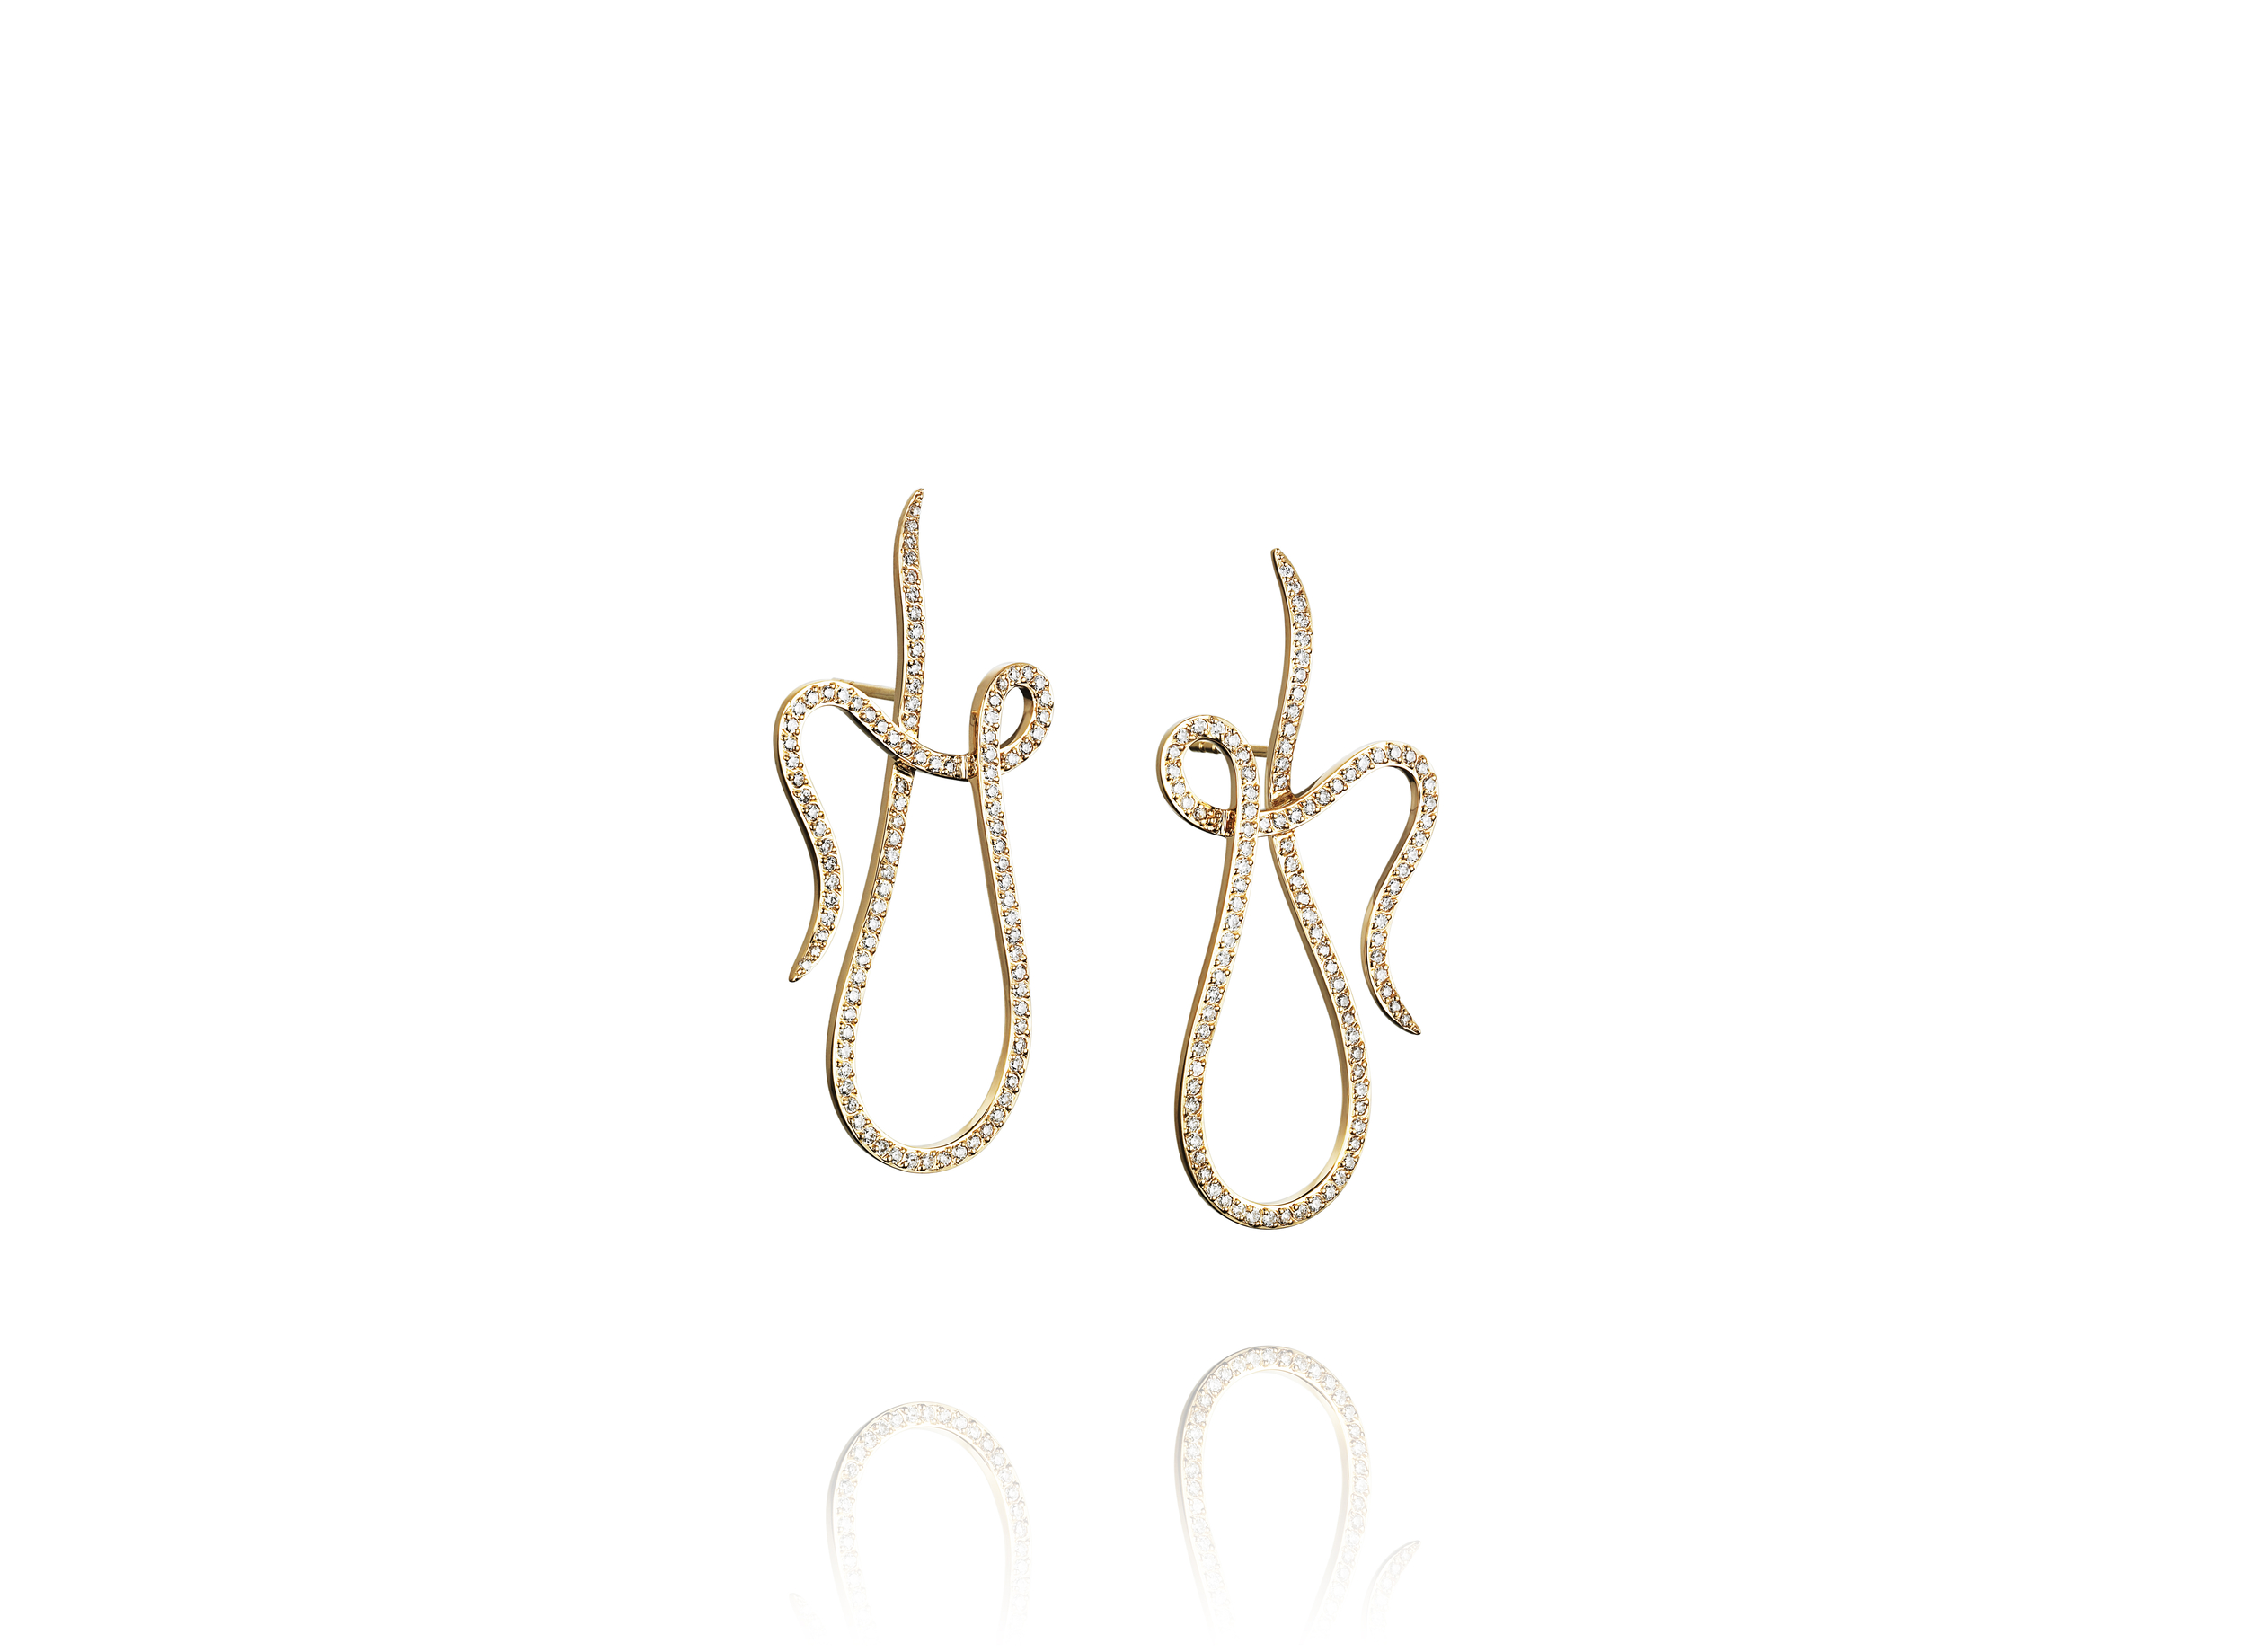  Shape of a Dream &amp; Stars earrings in 18k yellow gold with diamonds, $6,285,  available at Efva Attling .&nbsp; 